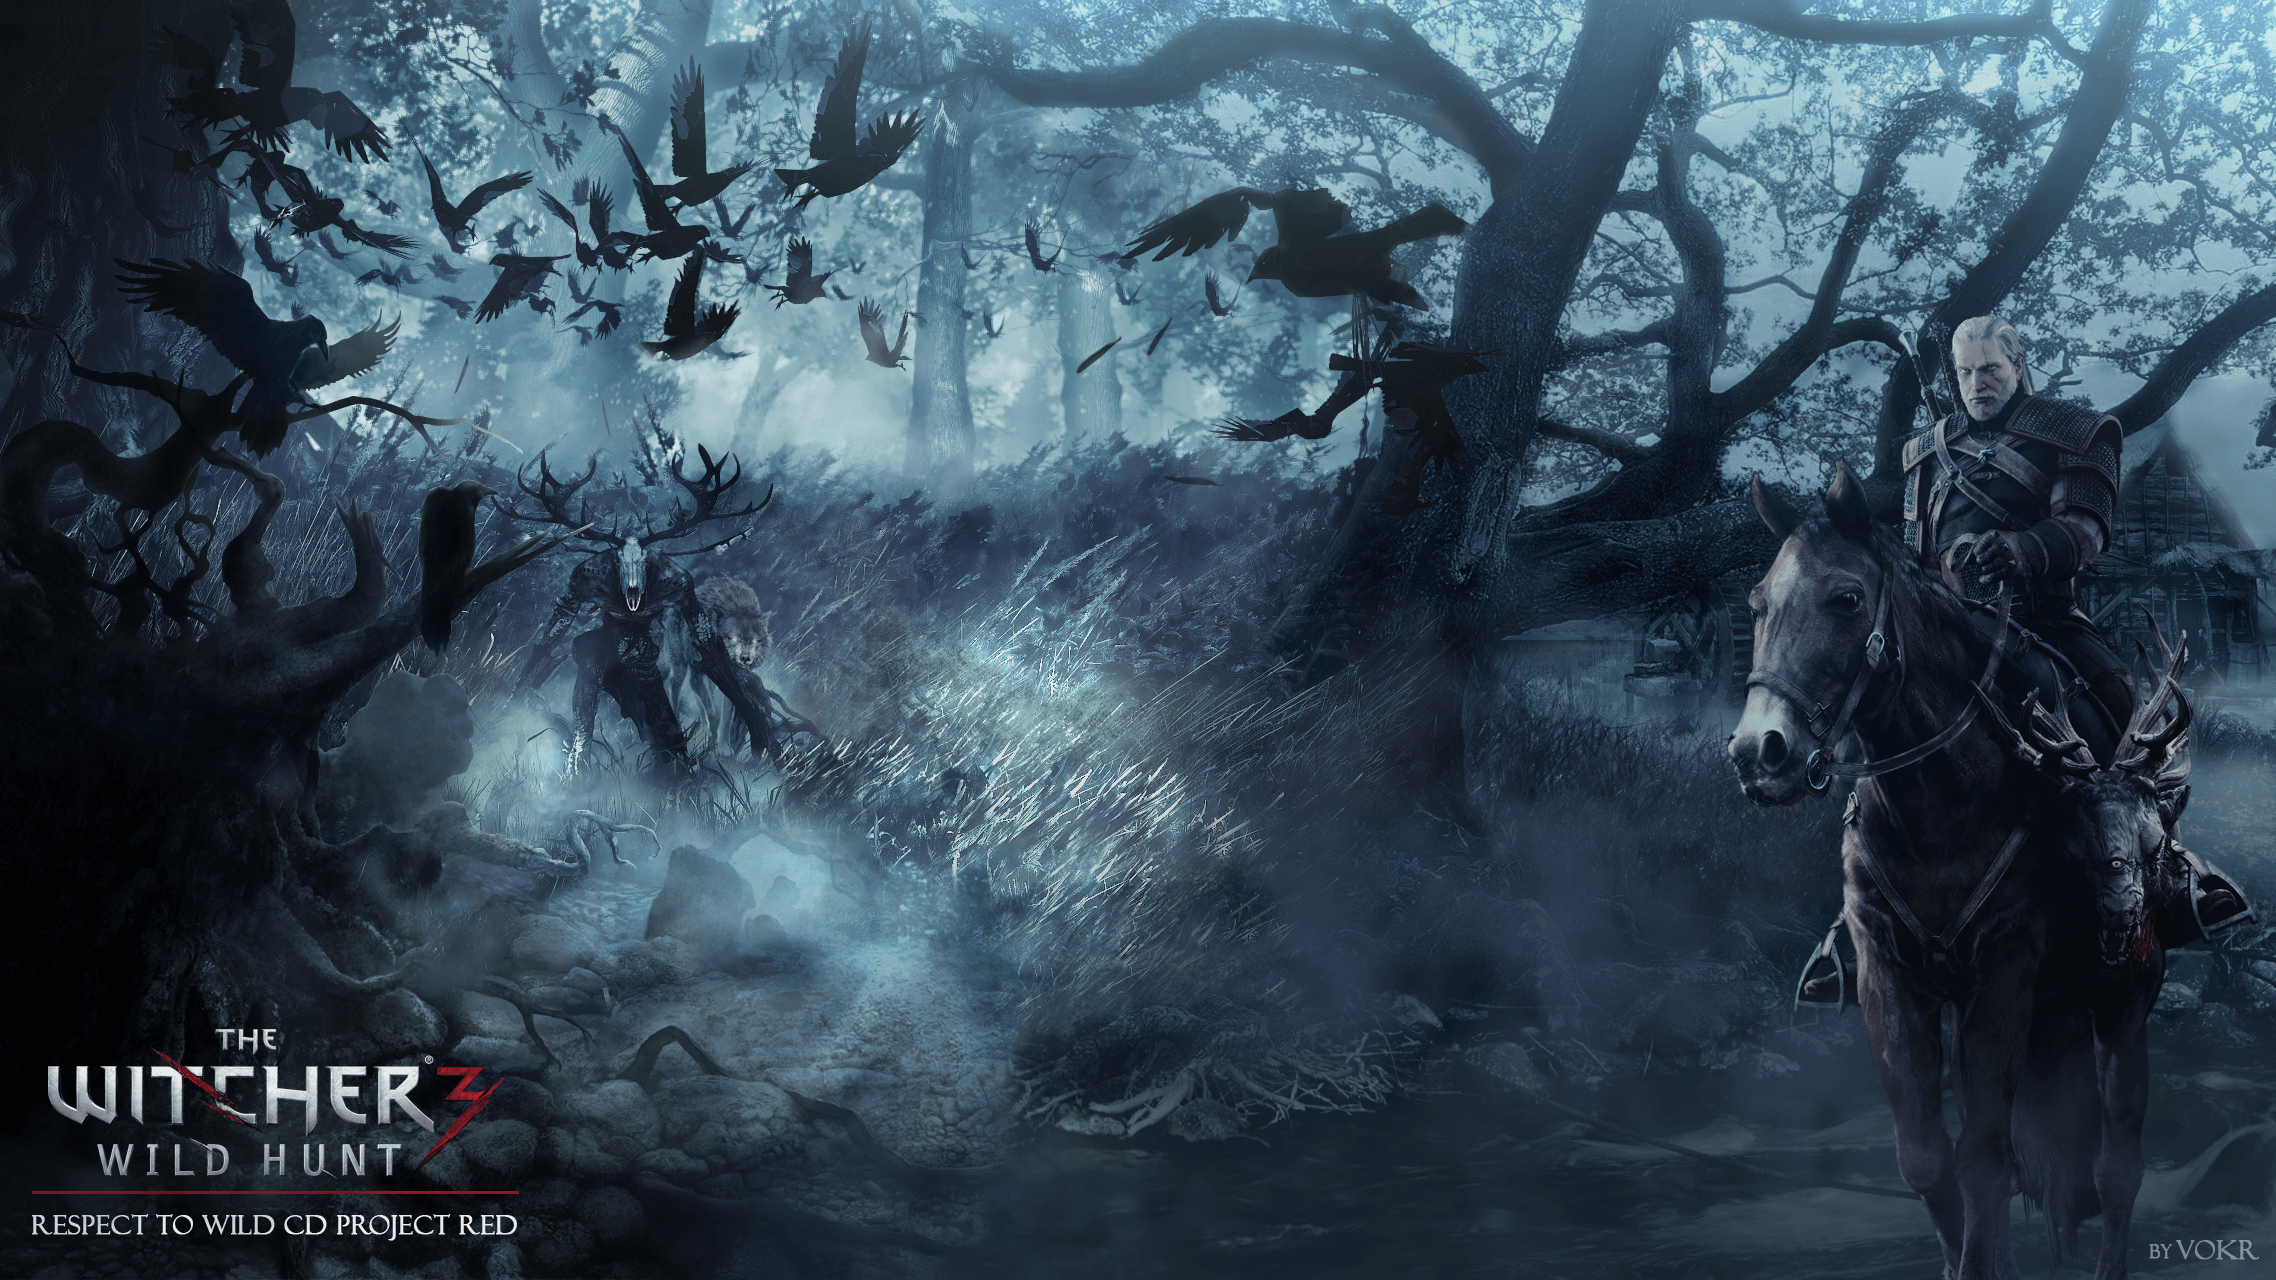 The Witcher 3 Wild Hunt HD Wallpaper (4)